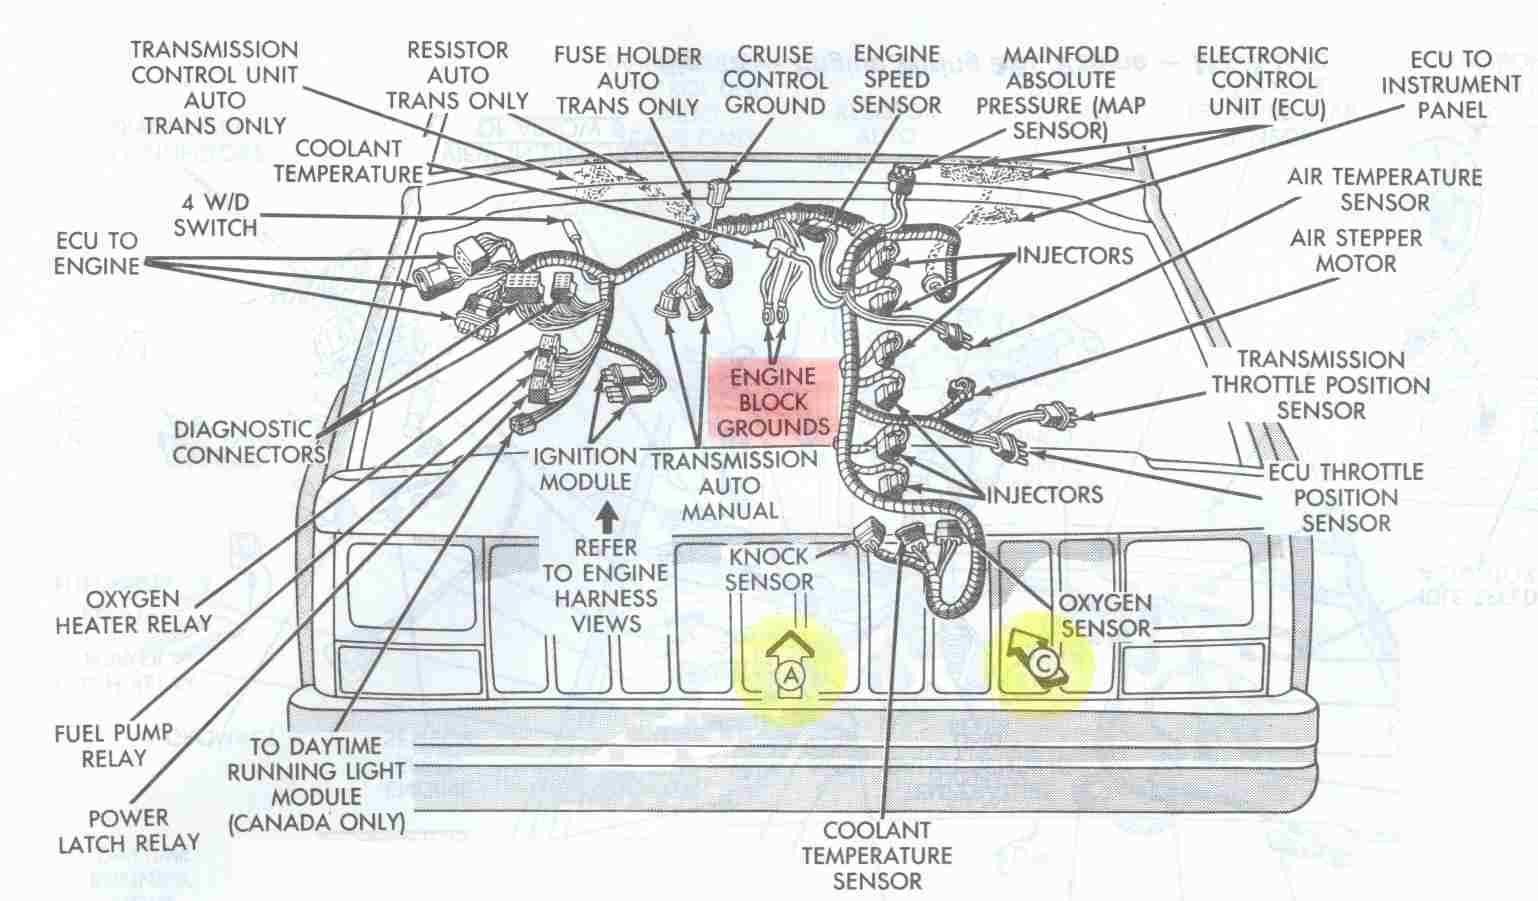 2001 Jeep Grand Cherokee Engine Diagram Wiring Library 99 Jeep Cherokee Electrical Schematics